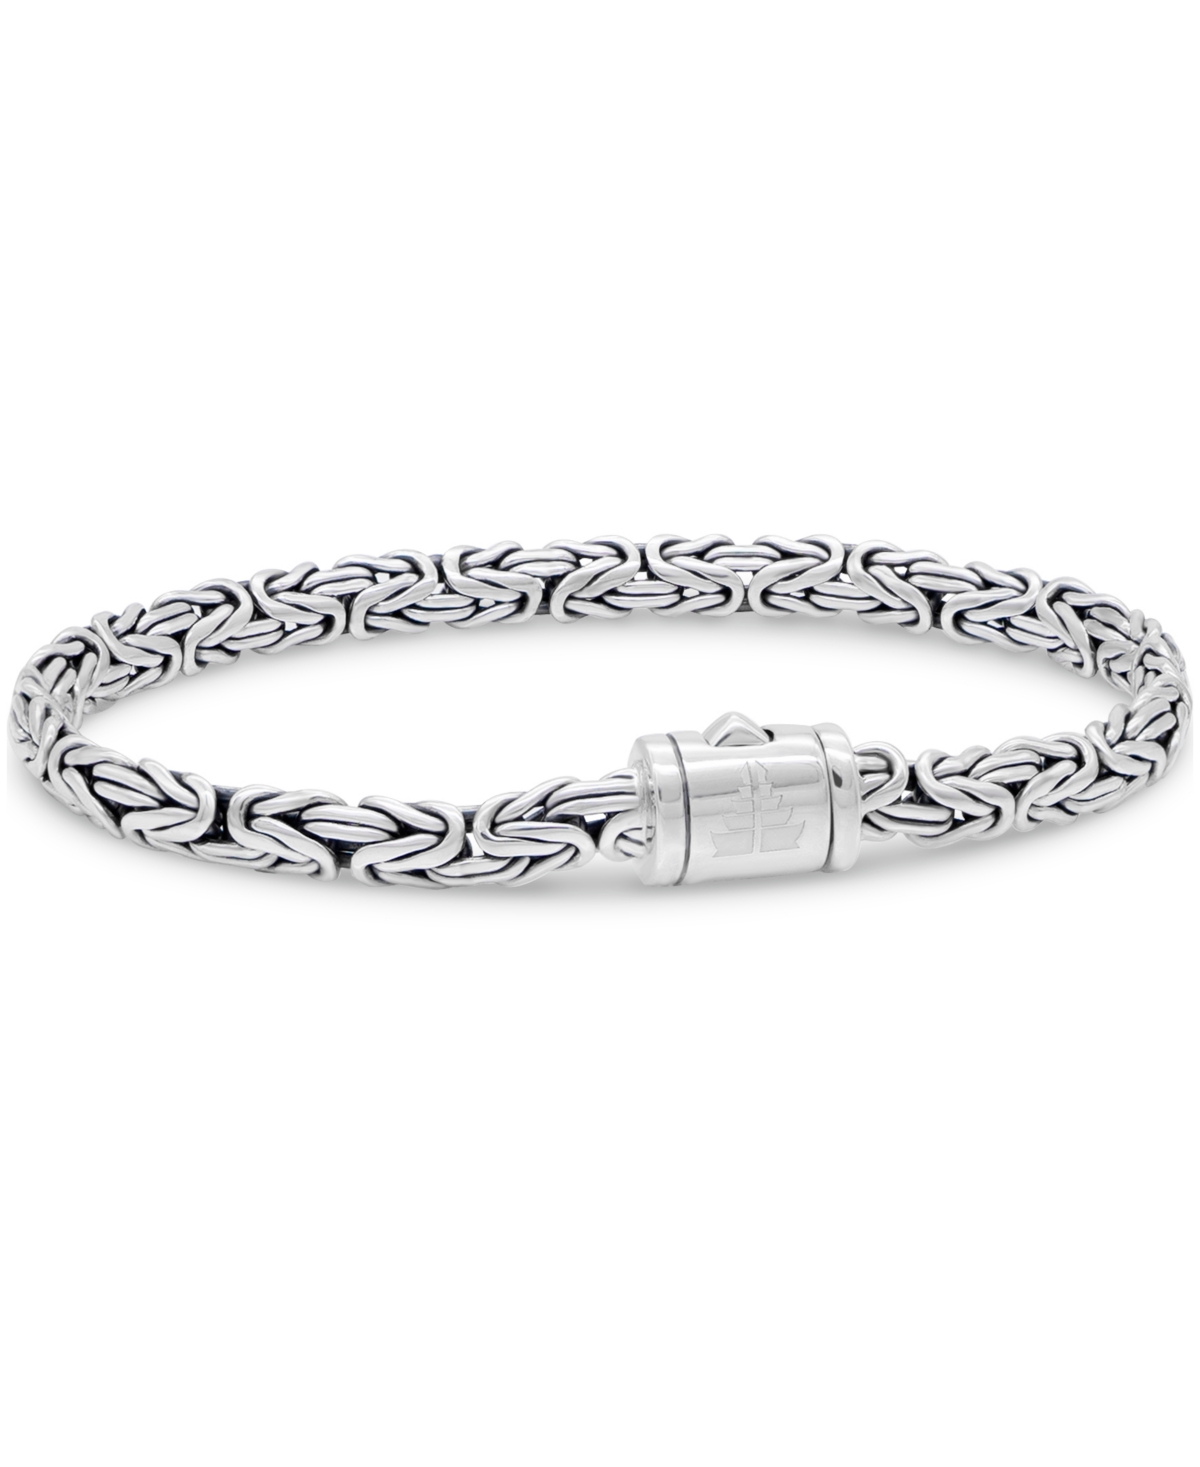 Borobudur Oval 5mm Chain Bracelet in Sterling Silver - Silver